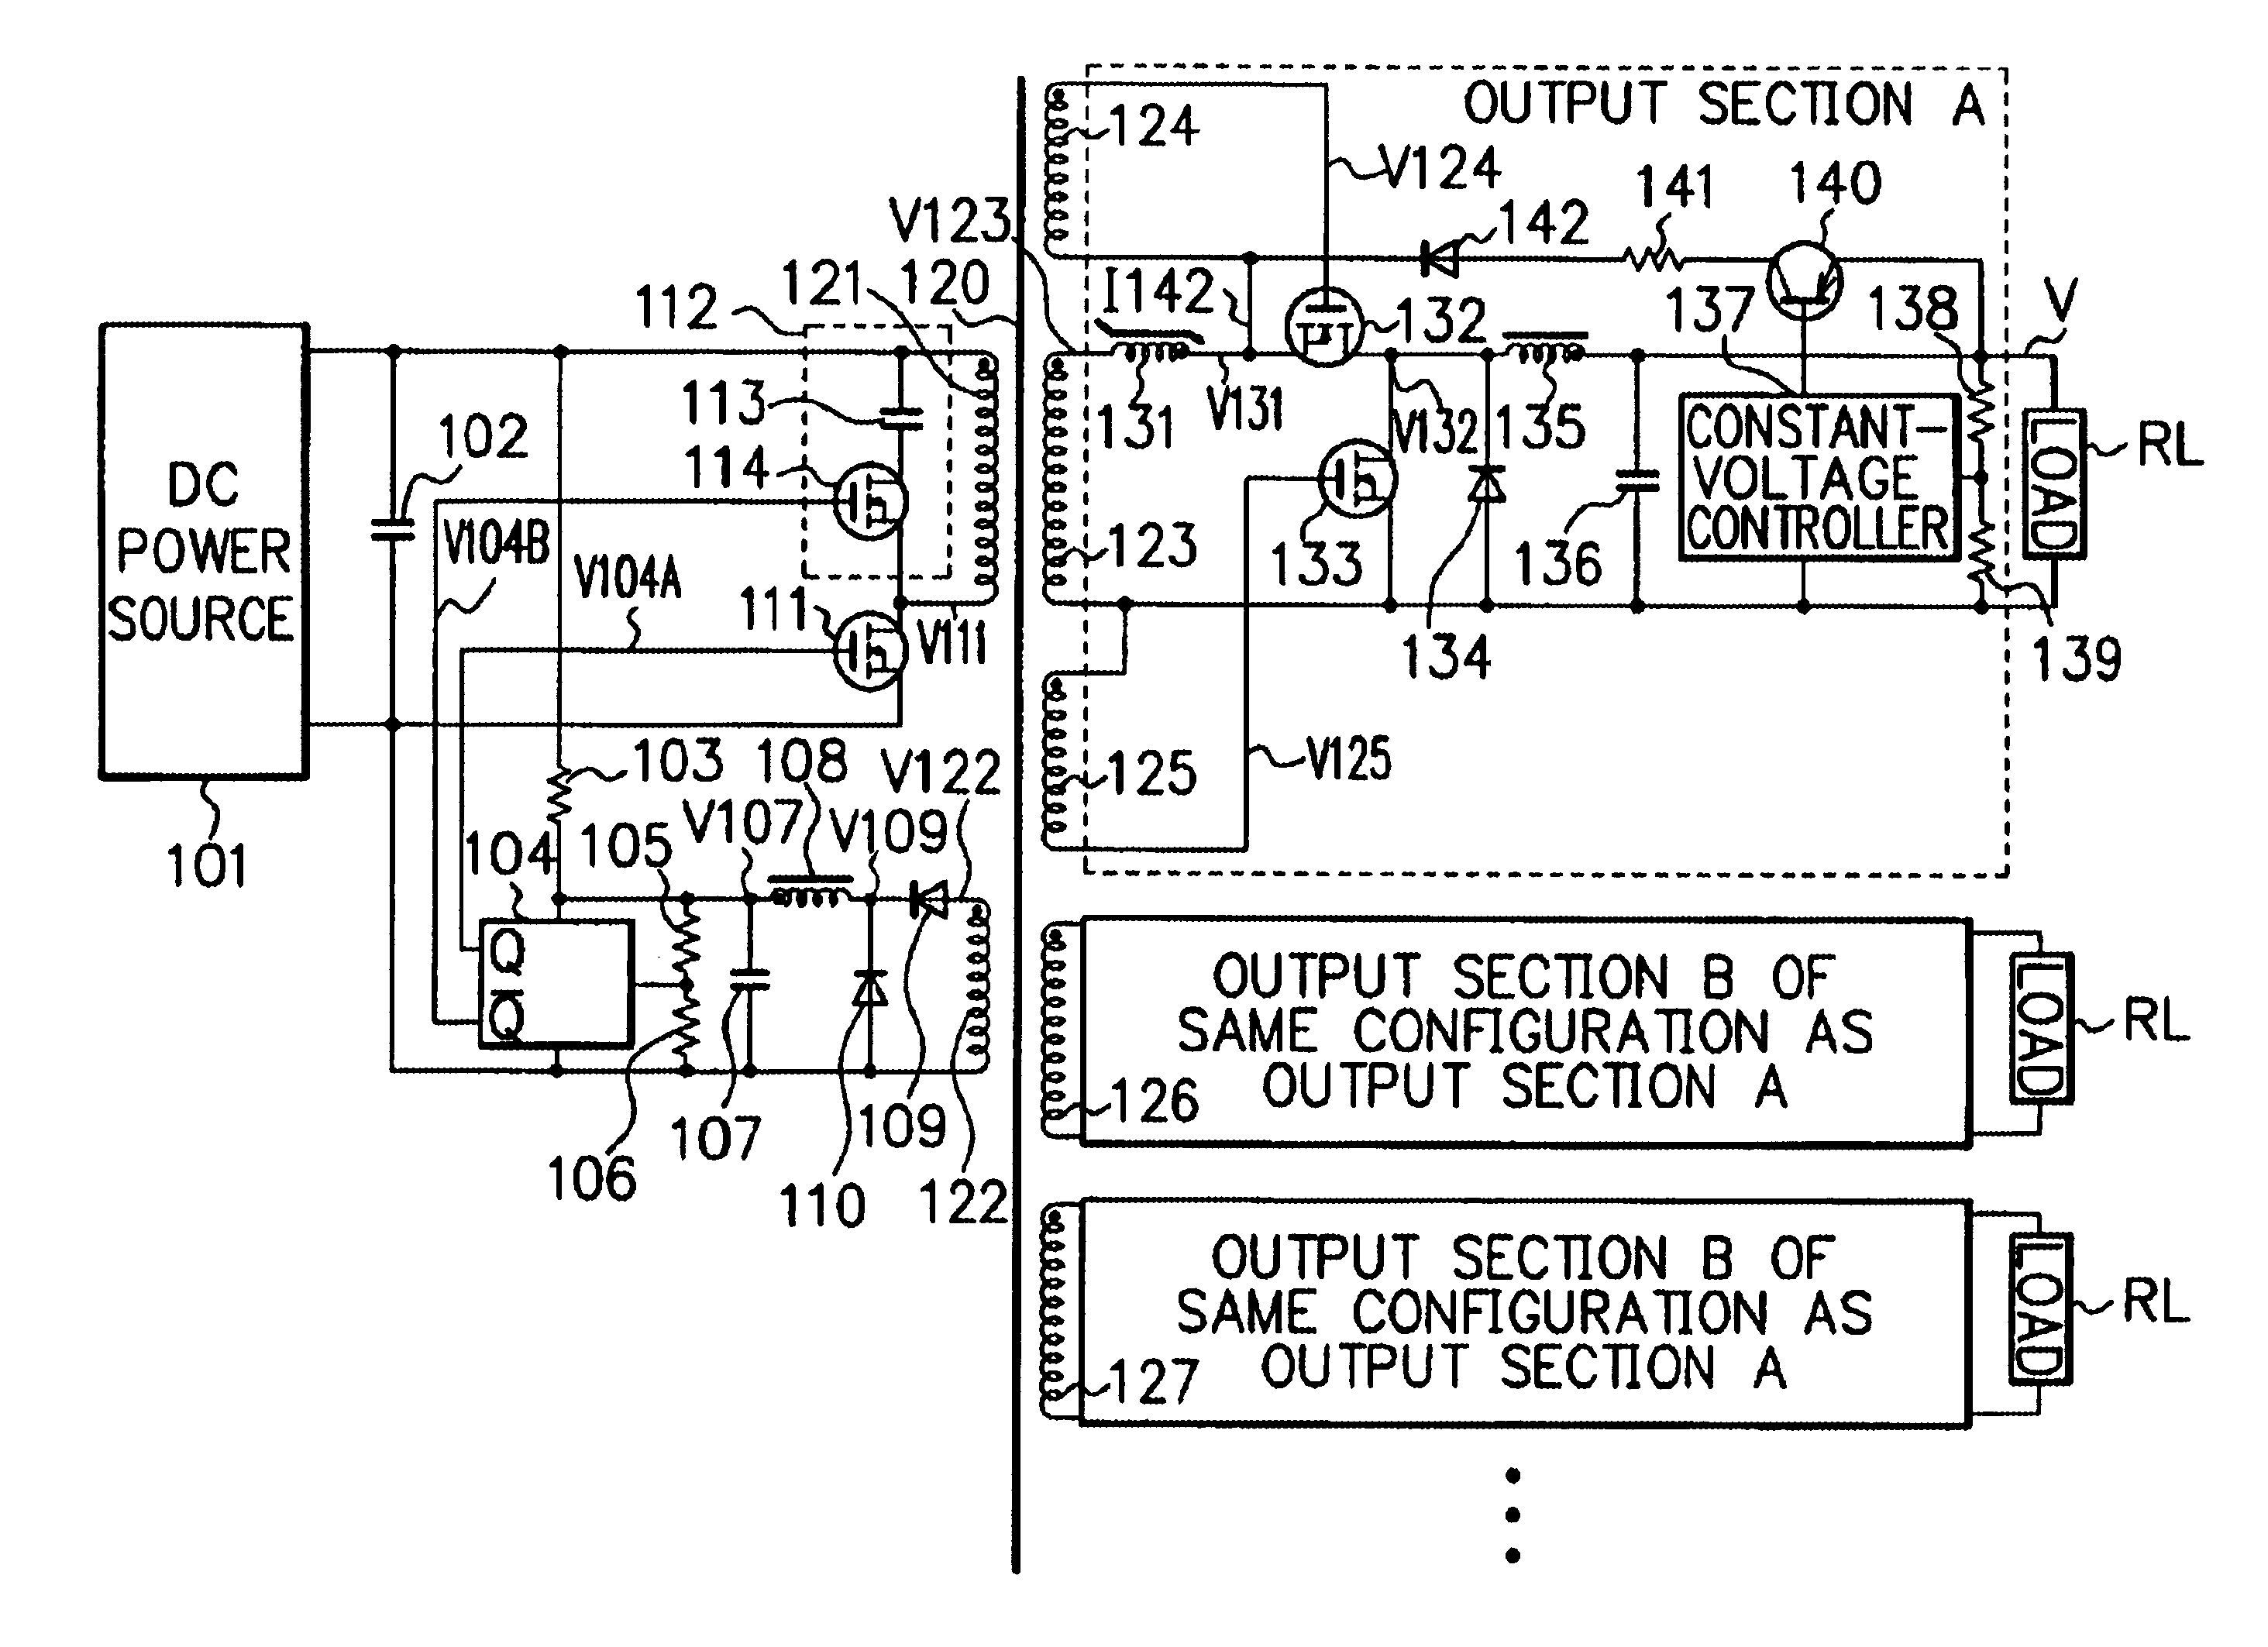 Multi-output switching power source circuit